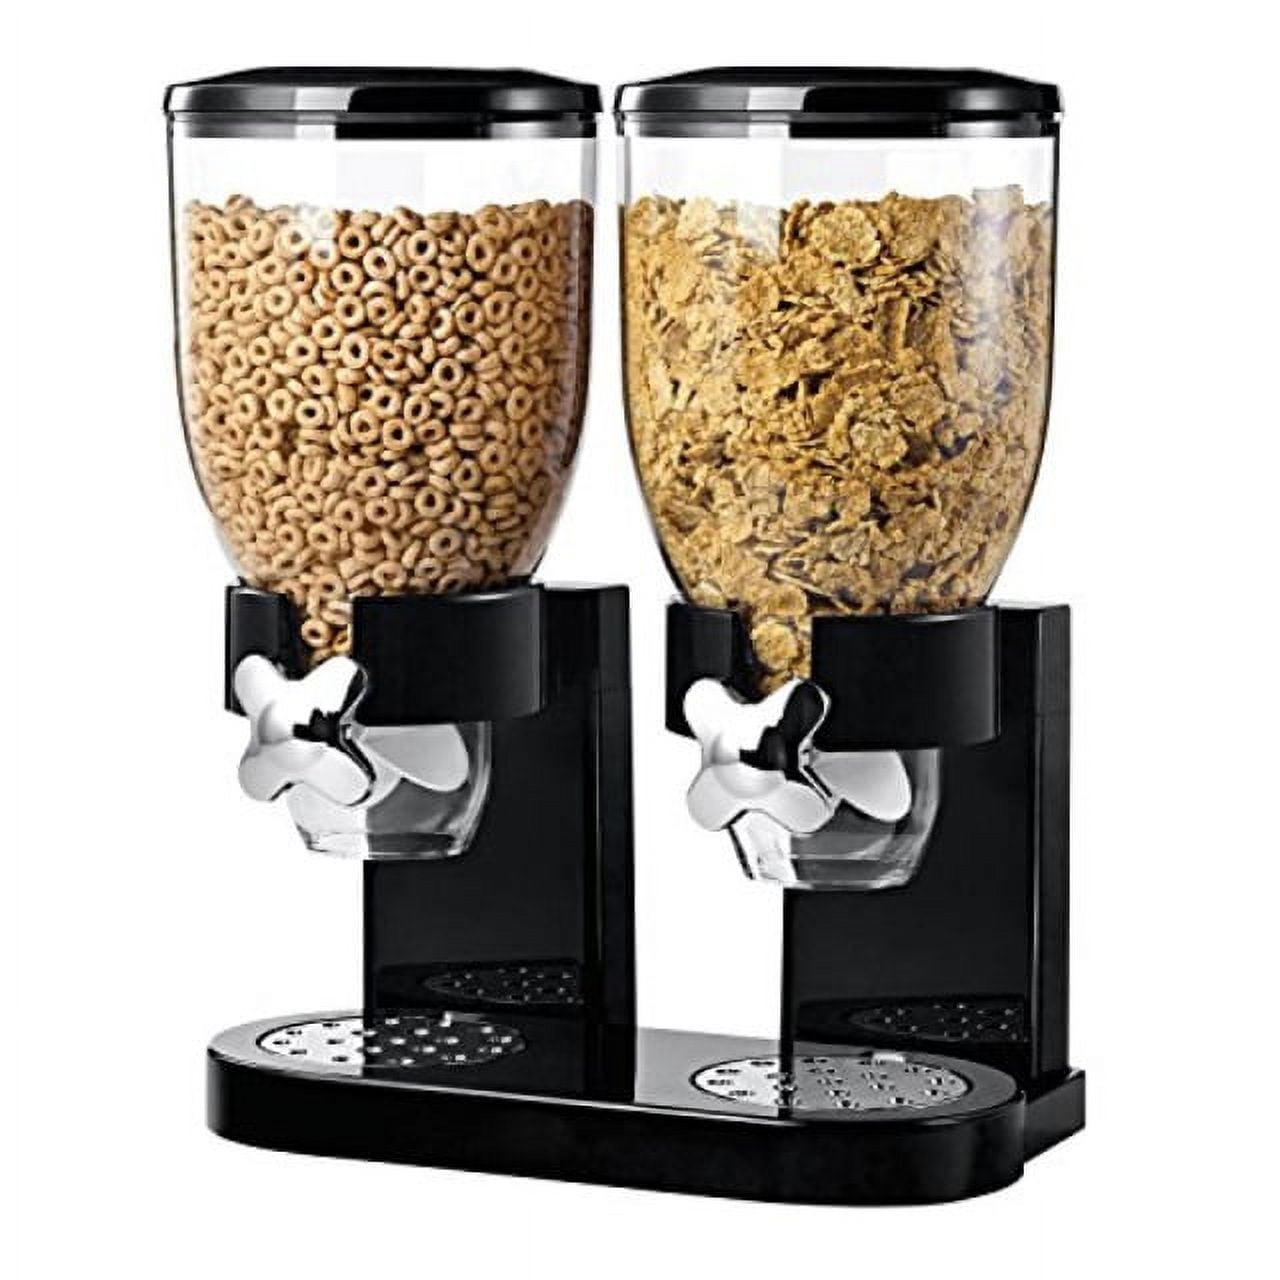 Gravity controlled Automatic seasoning dispenser – LazyPotOfNoodles